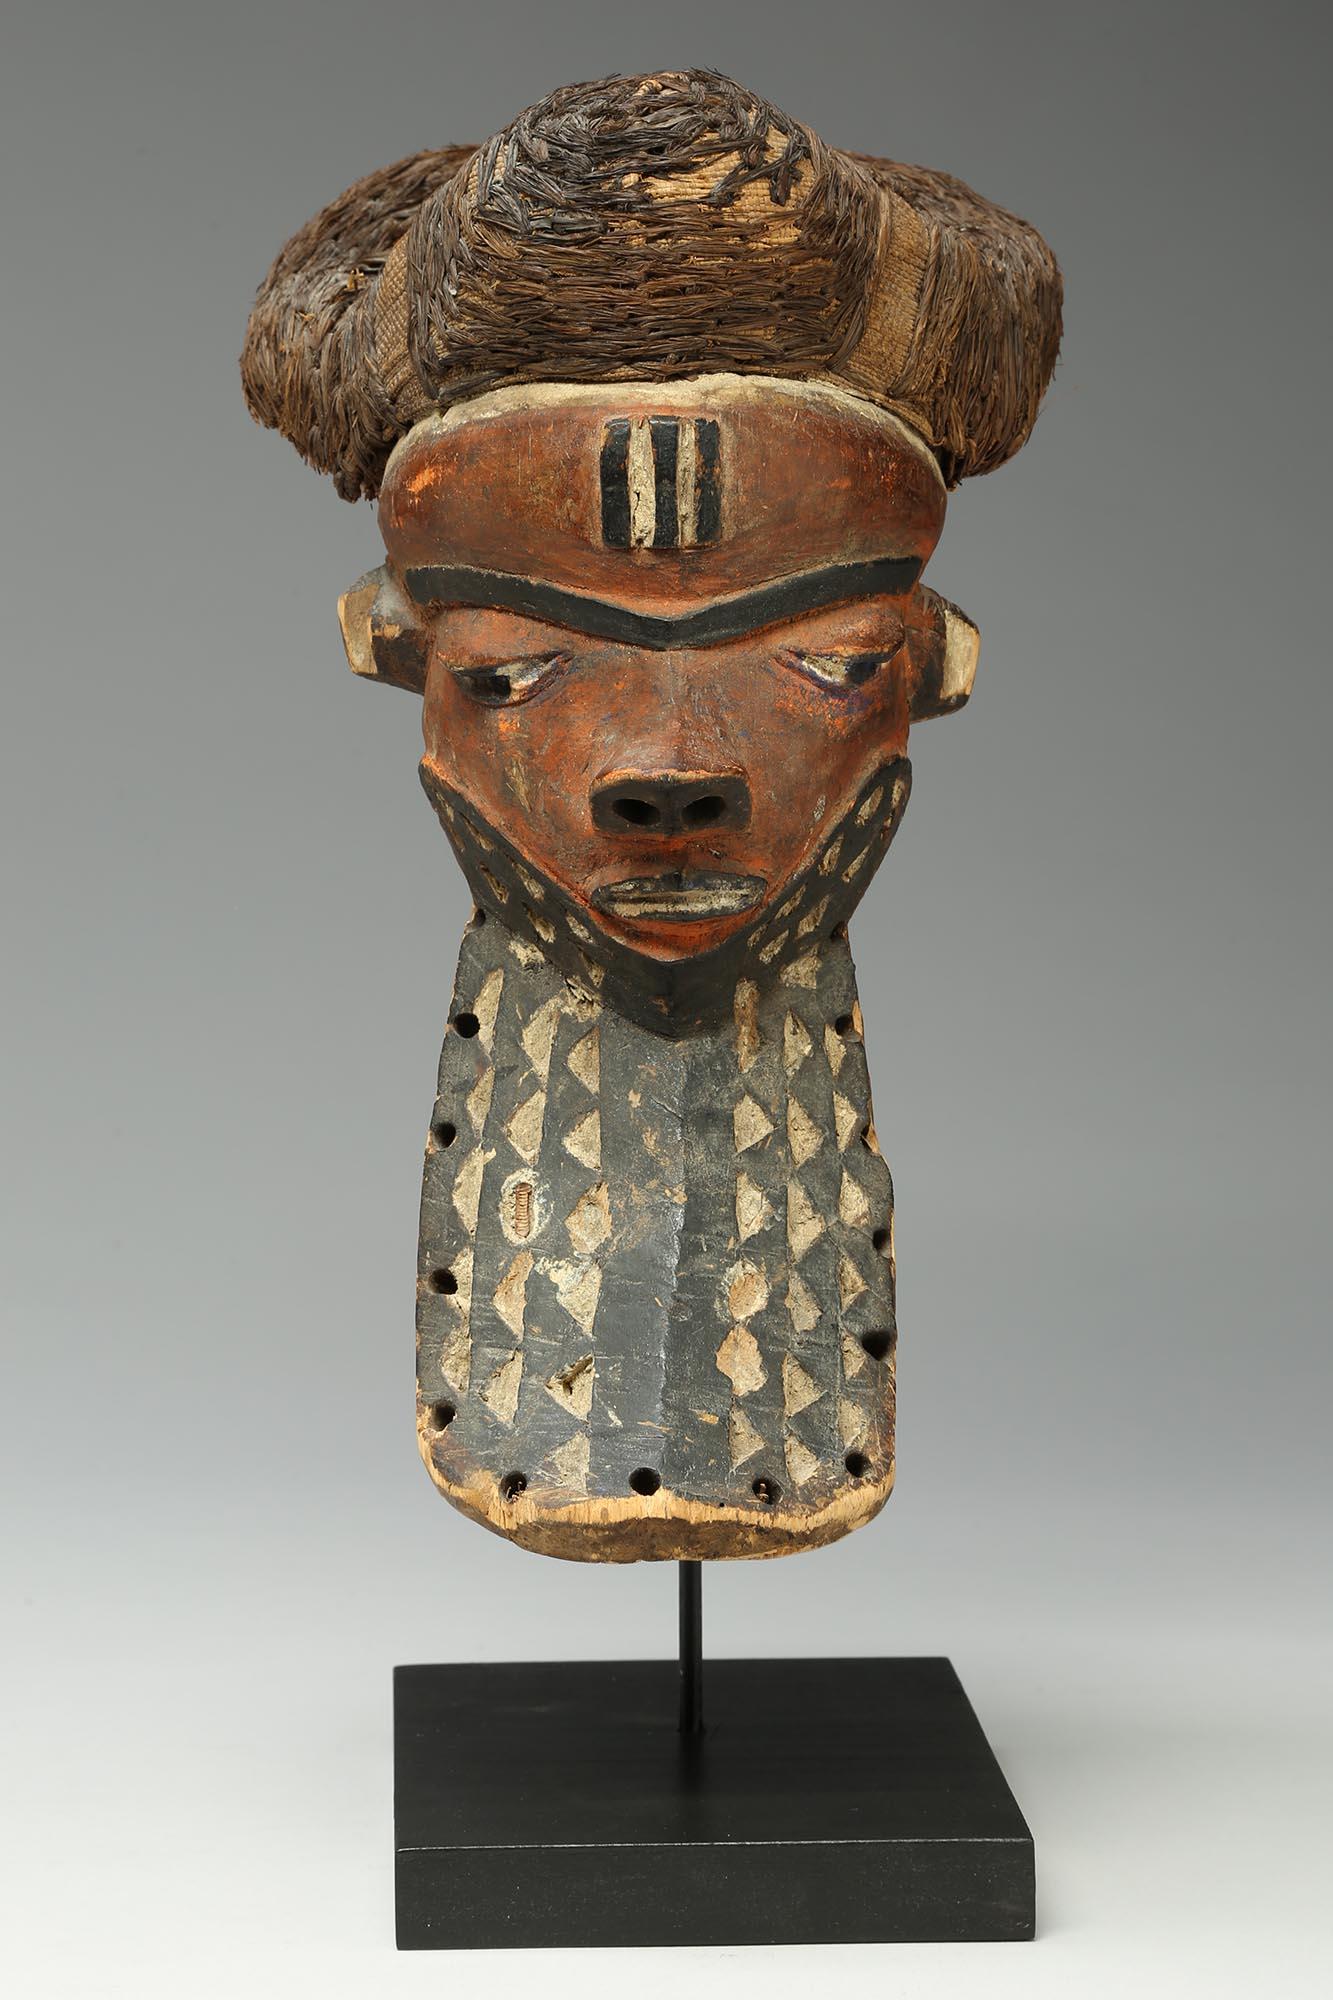 Old Pende giwoyo mask with red pigments, black and white beard with carved triangles and woven black raffia hair cap
The mask is 13 1/4 inches high, on custom wood base total height 14 inches.

